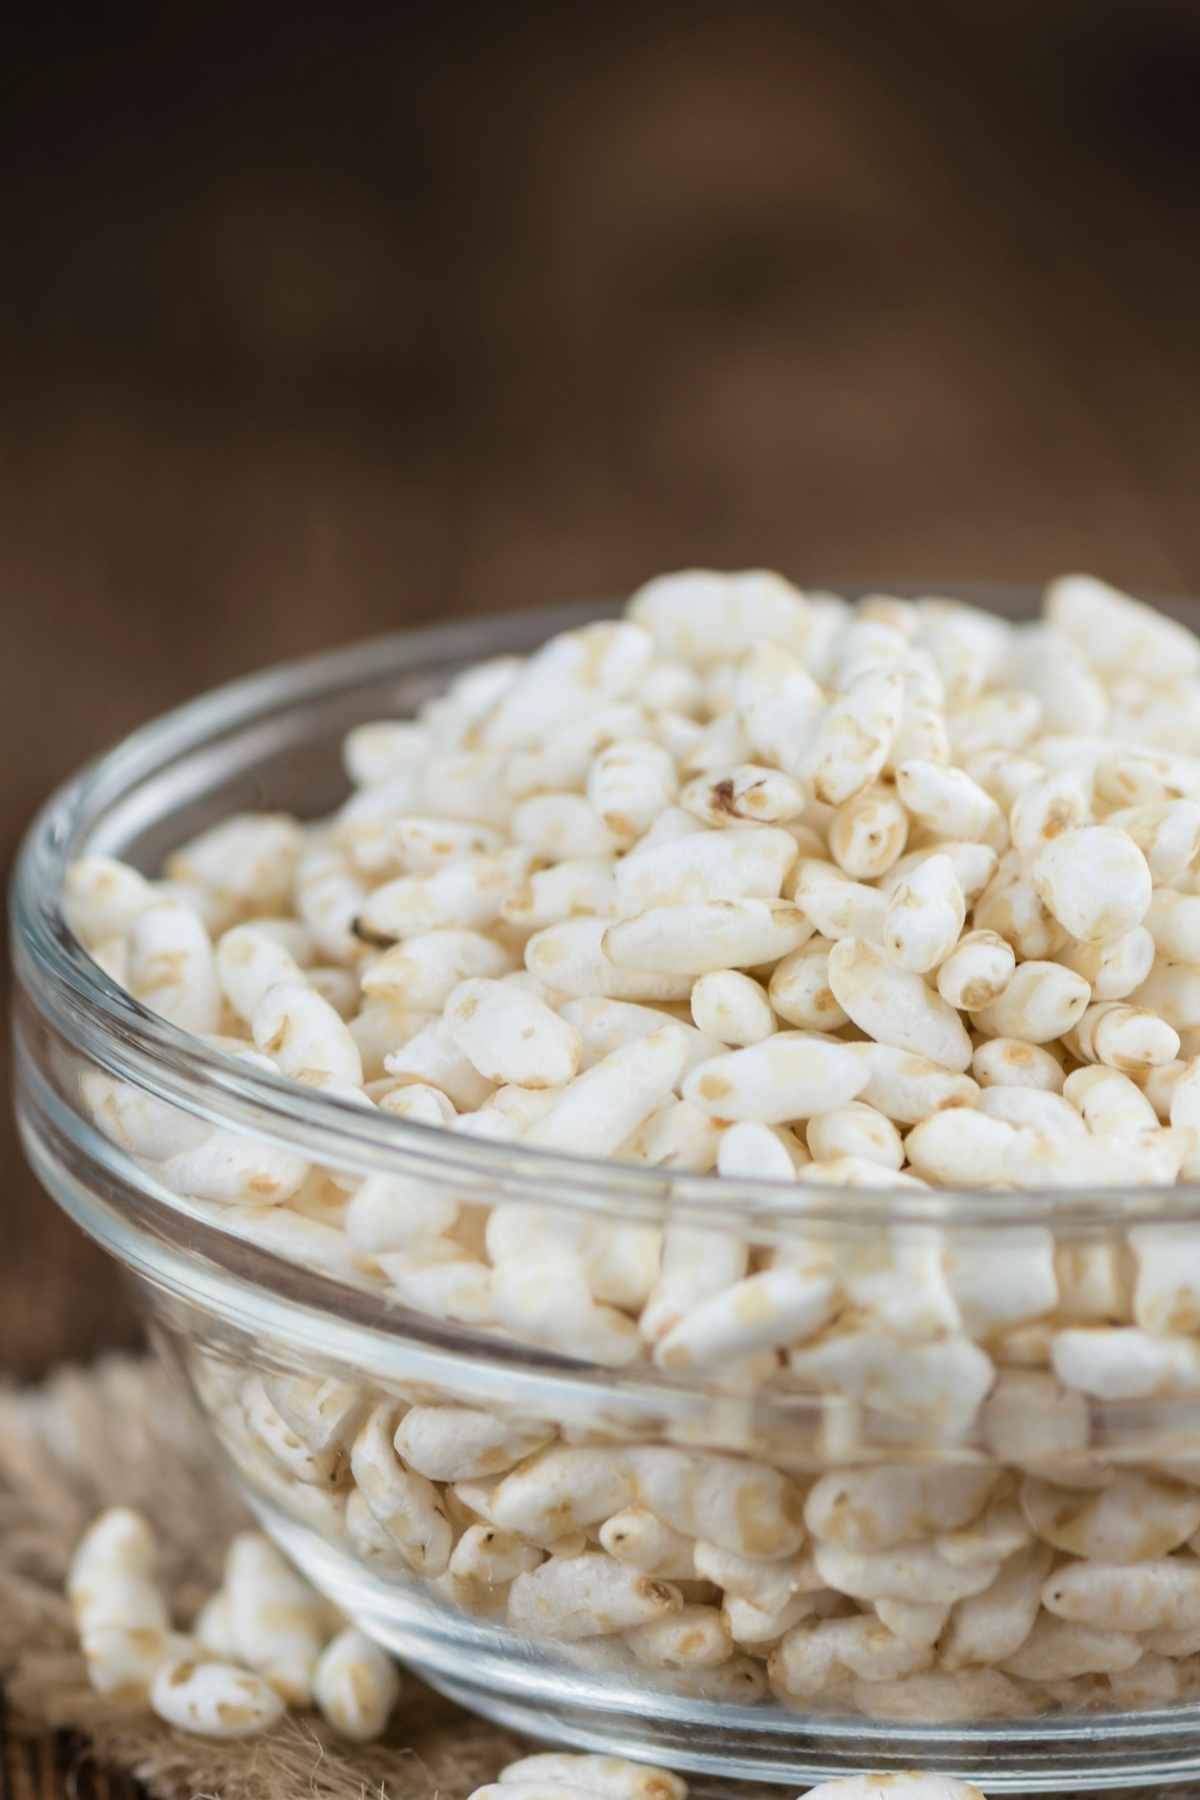 Do you remember eating puffed rice or popped rice when you were a kid? Here’s a new twist on a favorite childhood classic. Jasmine puffed rice is a 2-ingredient easy dish that can be served up at any meal and even makes a delicious dessert.